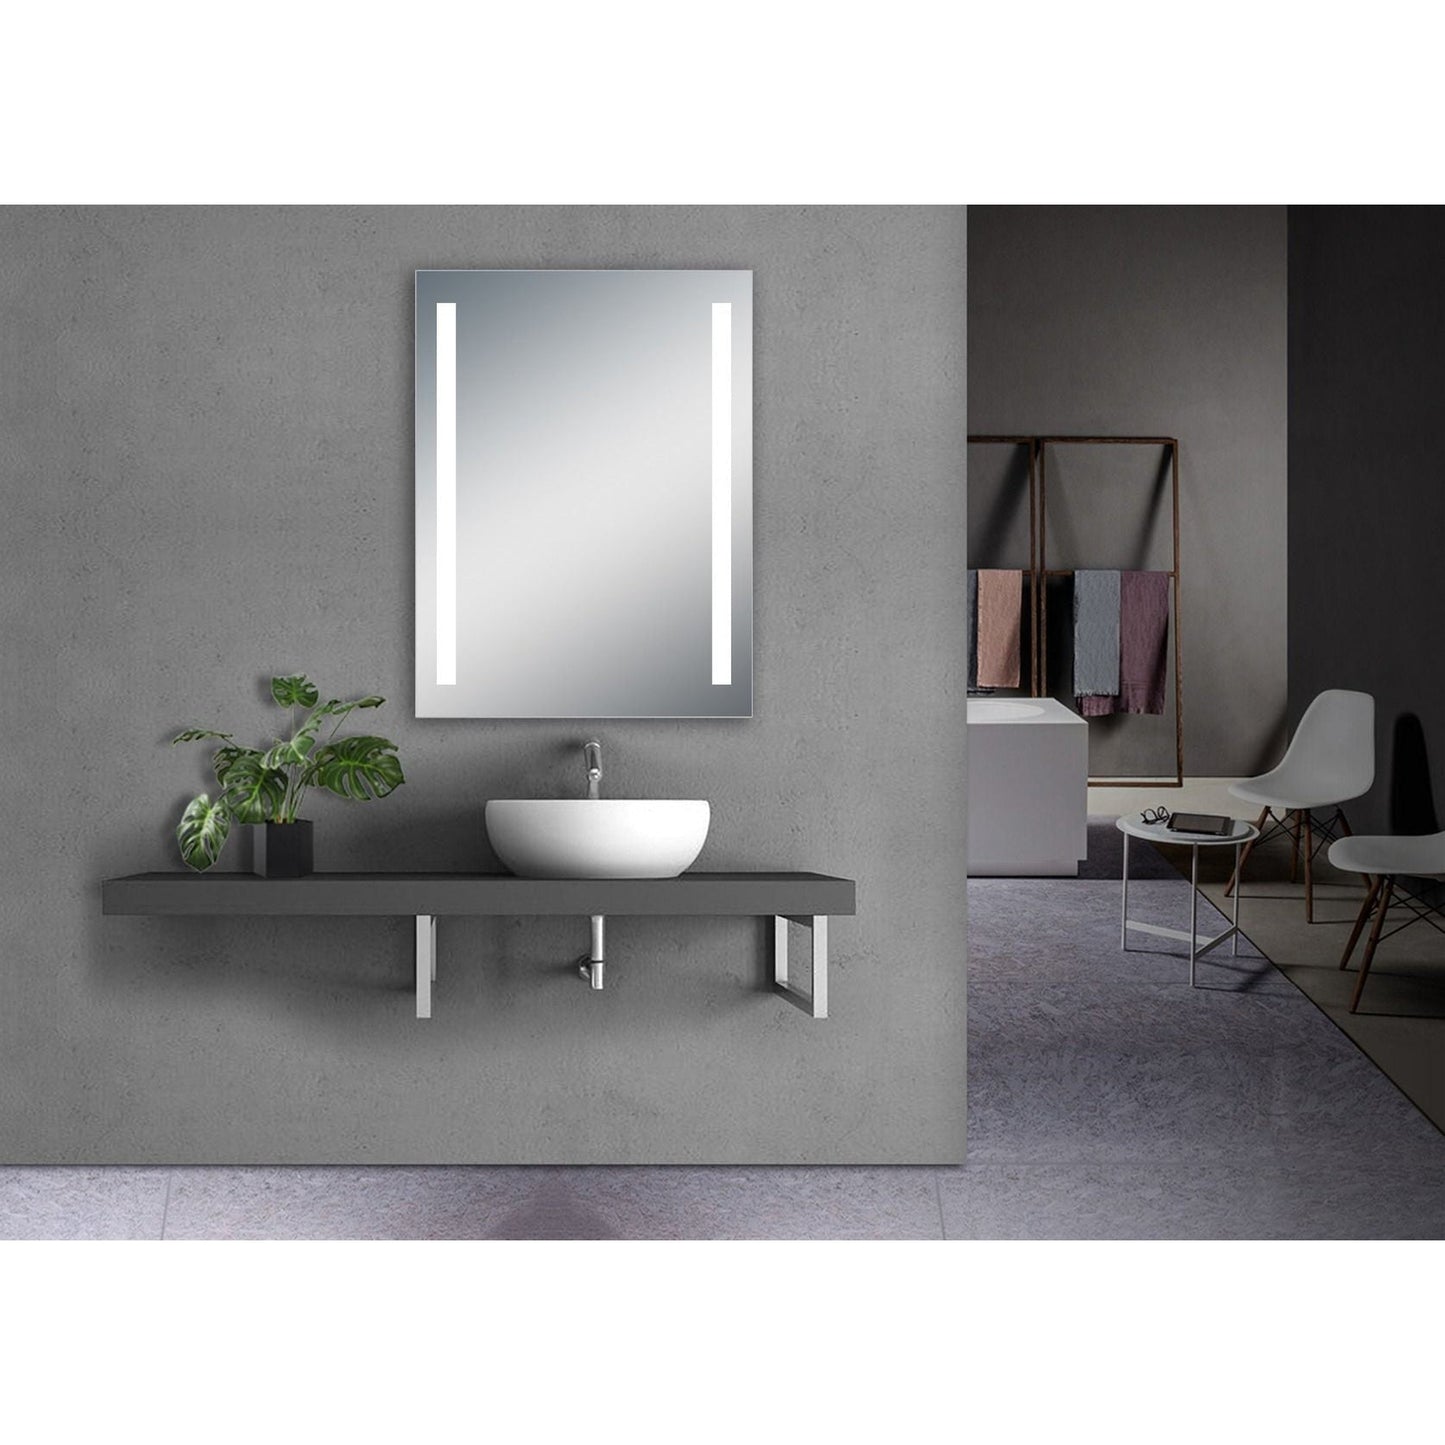 DreamWerks Treviso 24" W x 32" H LED Mirror with Dimmer and Defogger